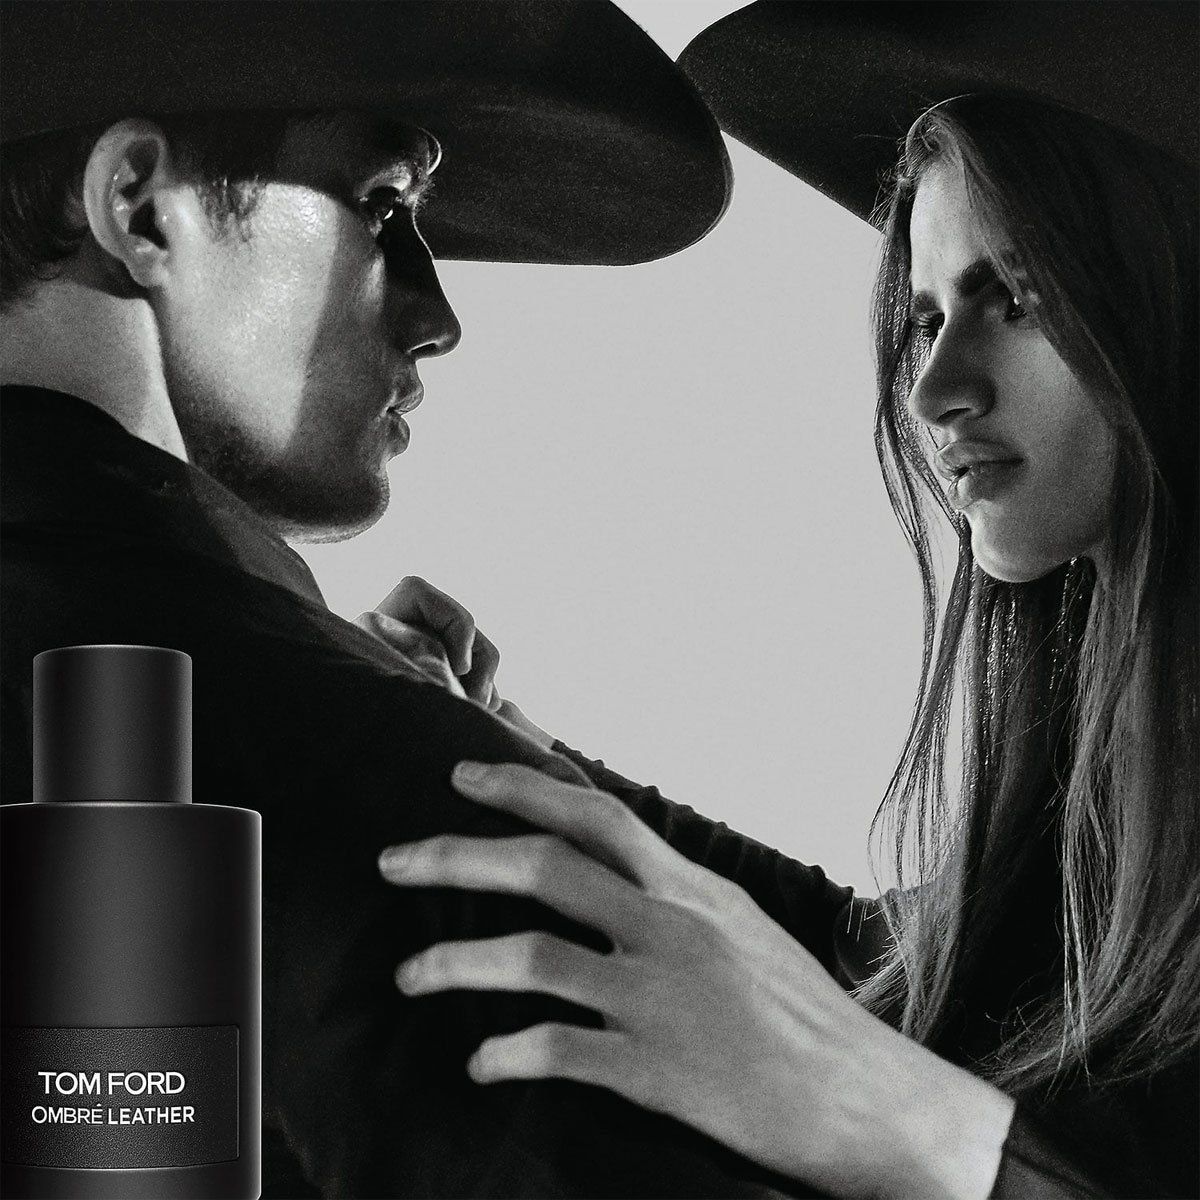 Introducir 39+ imagen tom ford homme leather - Abzlocal.mx